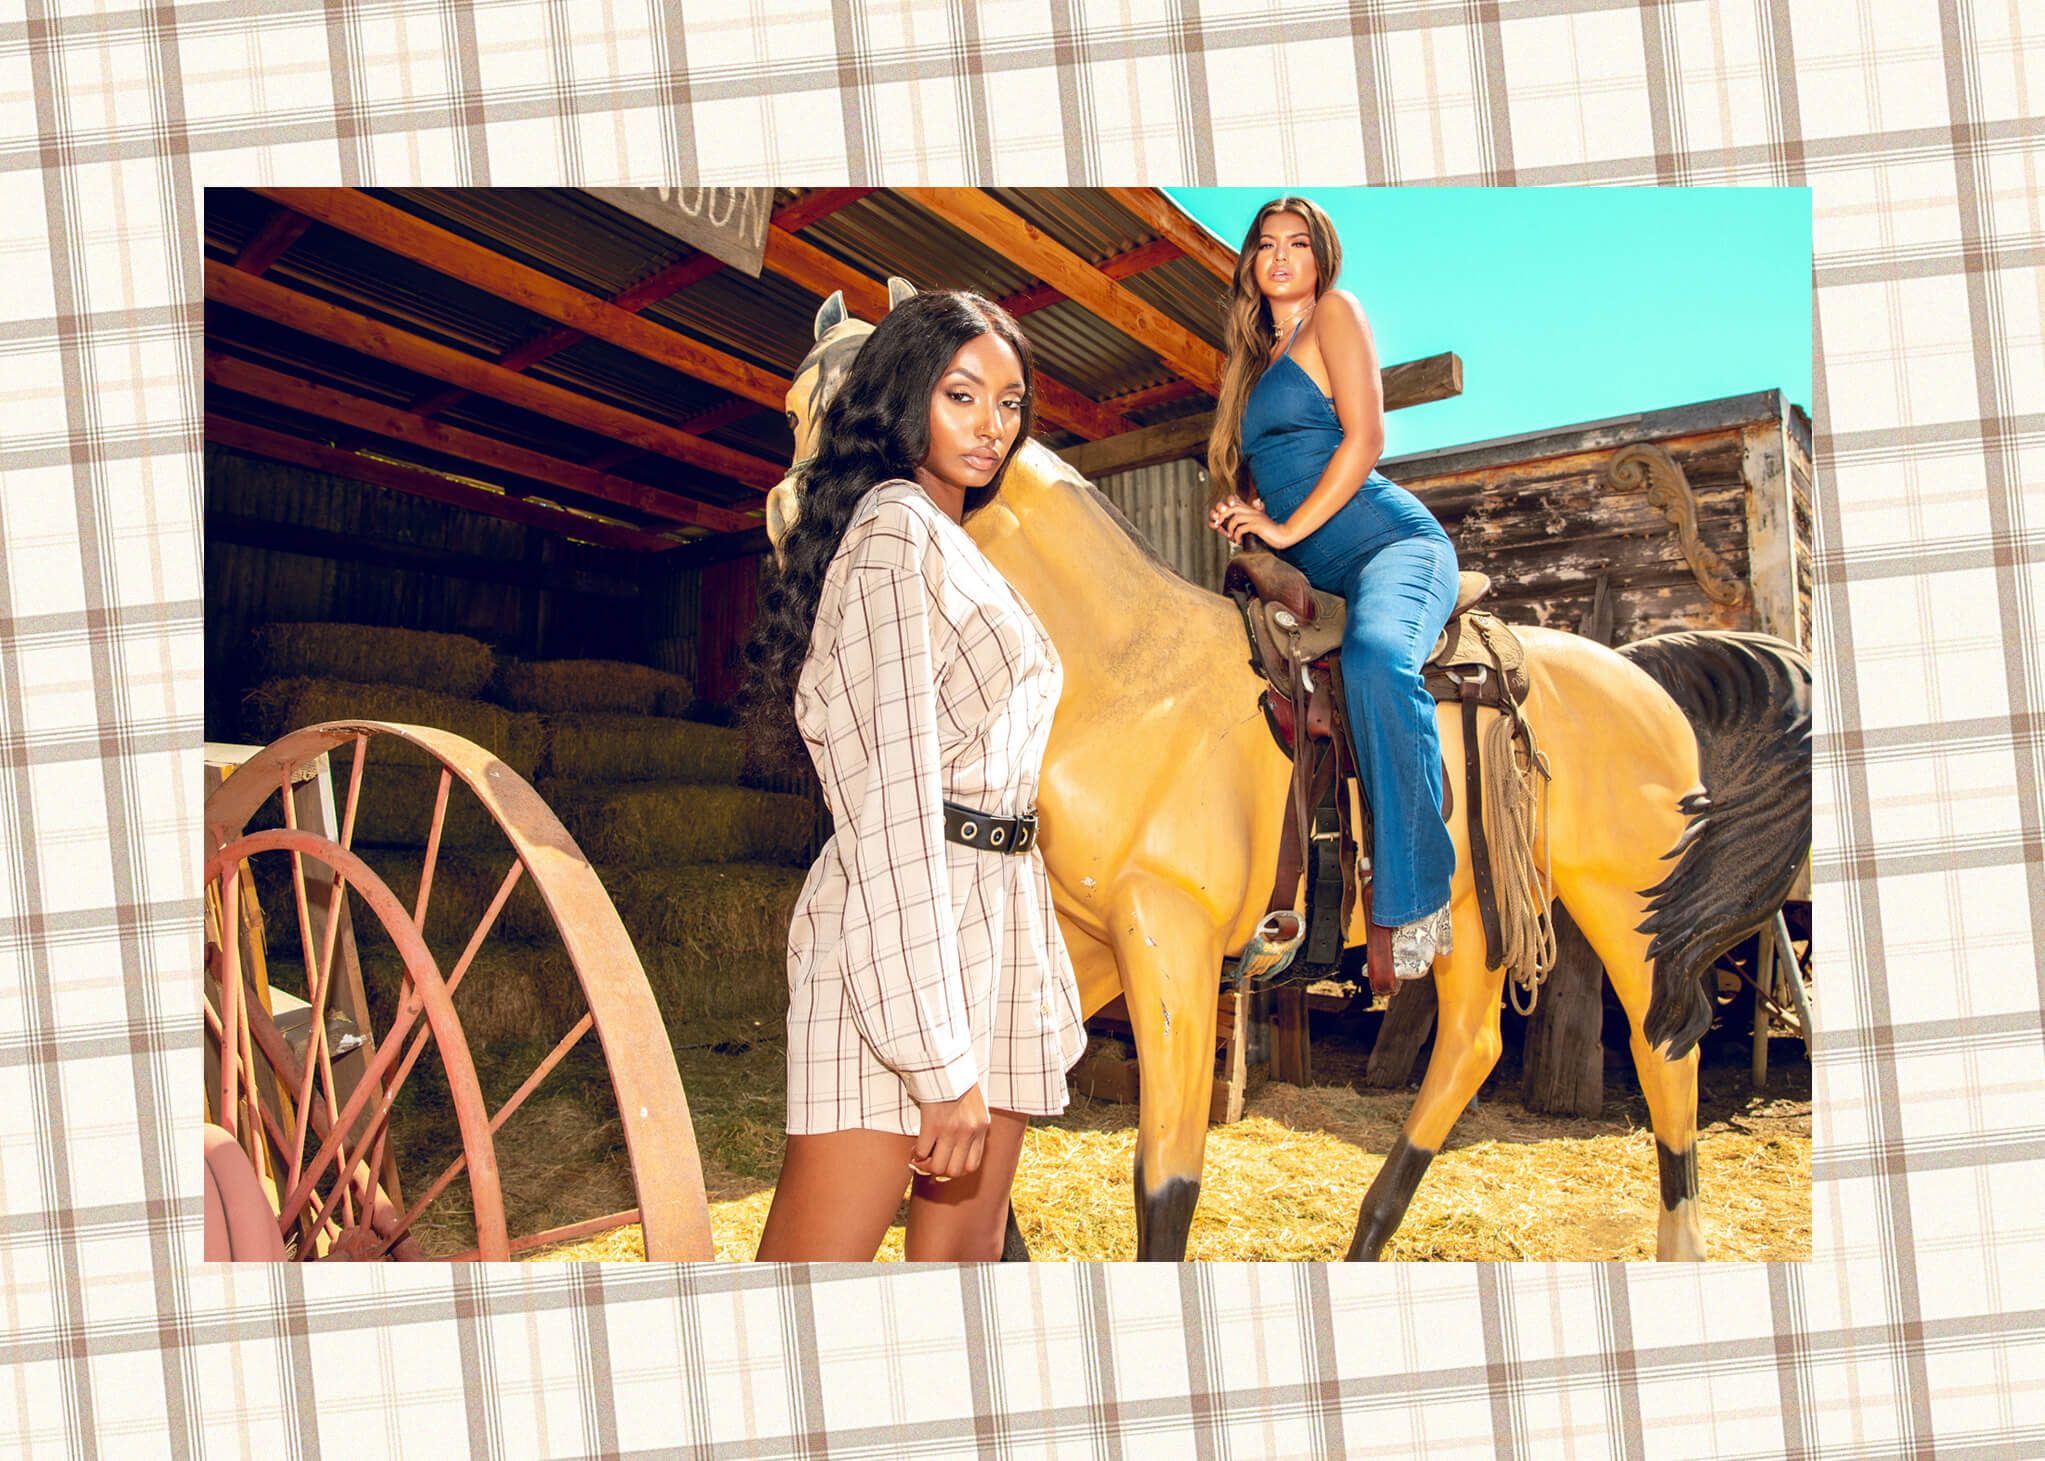 Pretty Little Thing clothing goes Wild Wild West